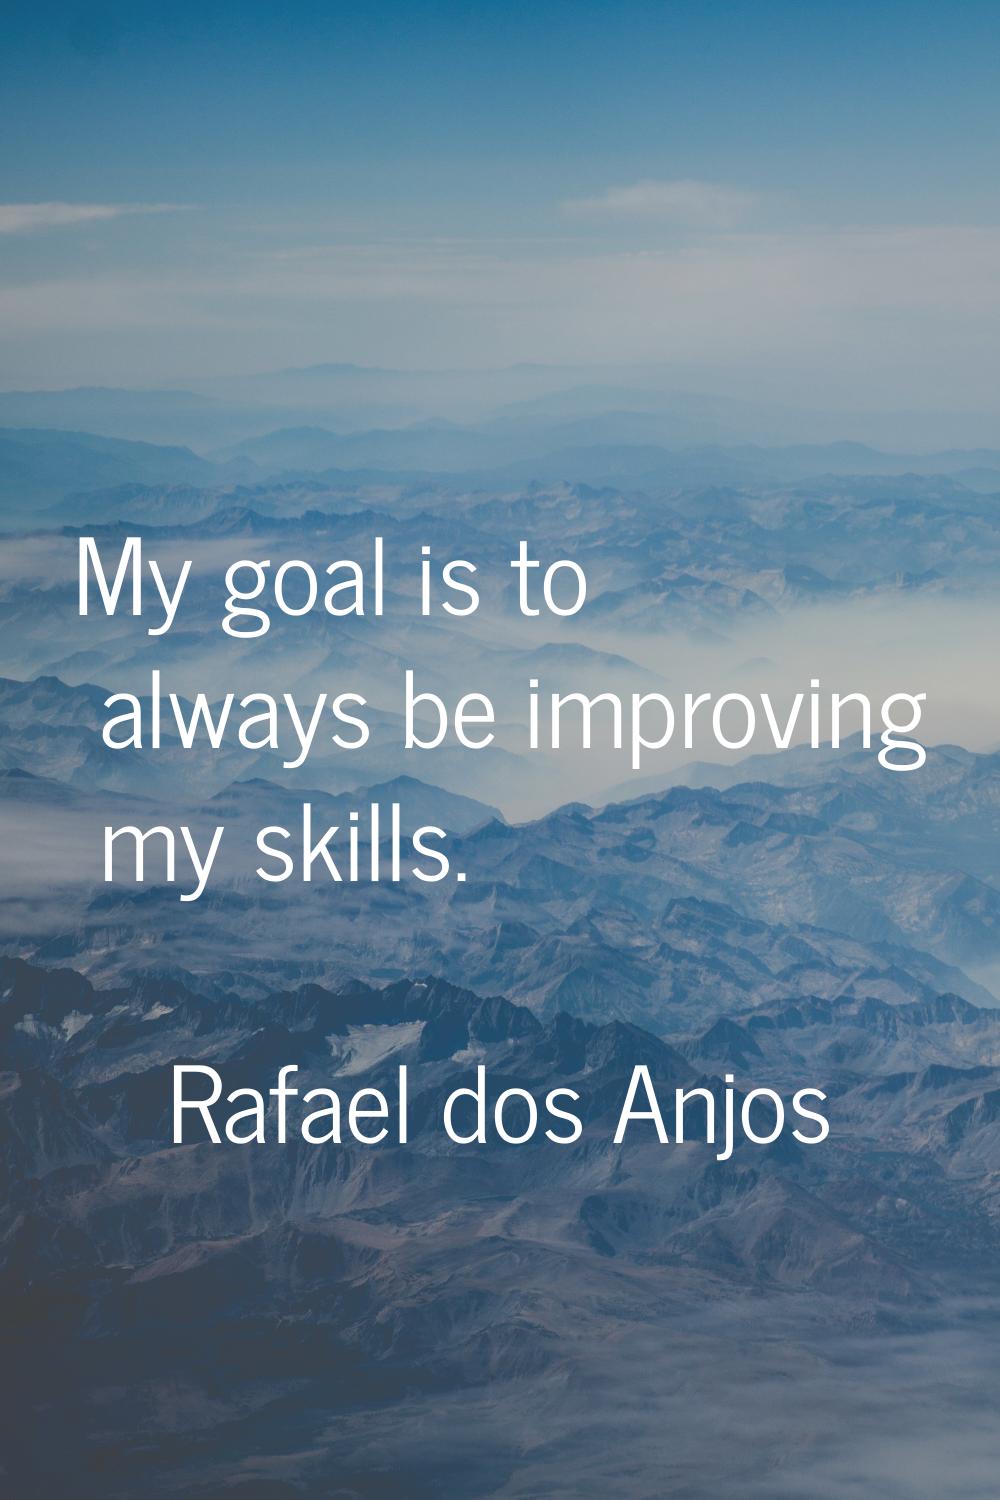 My goal is to always be improving my skills.